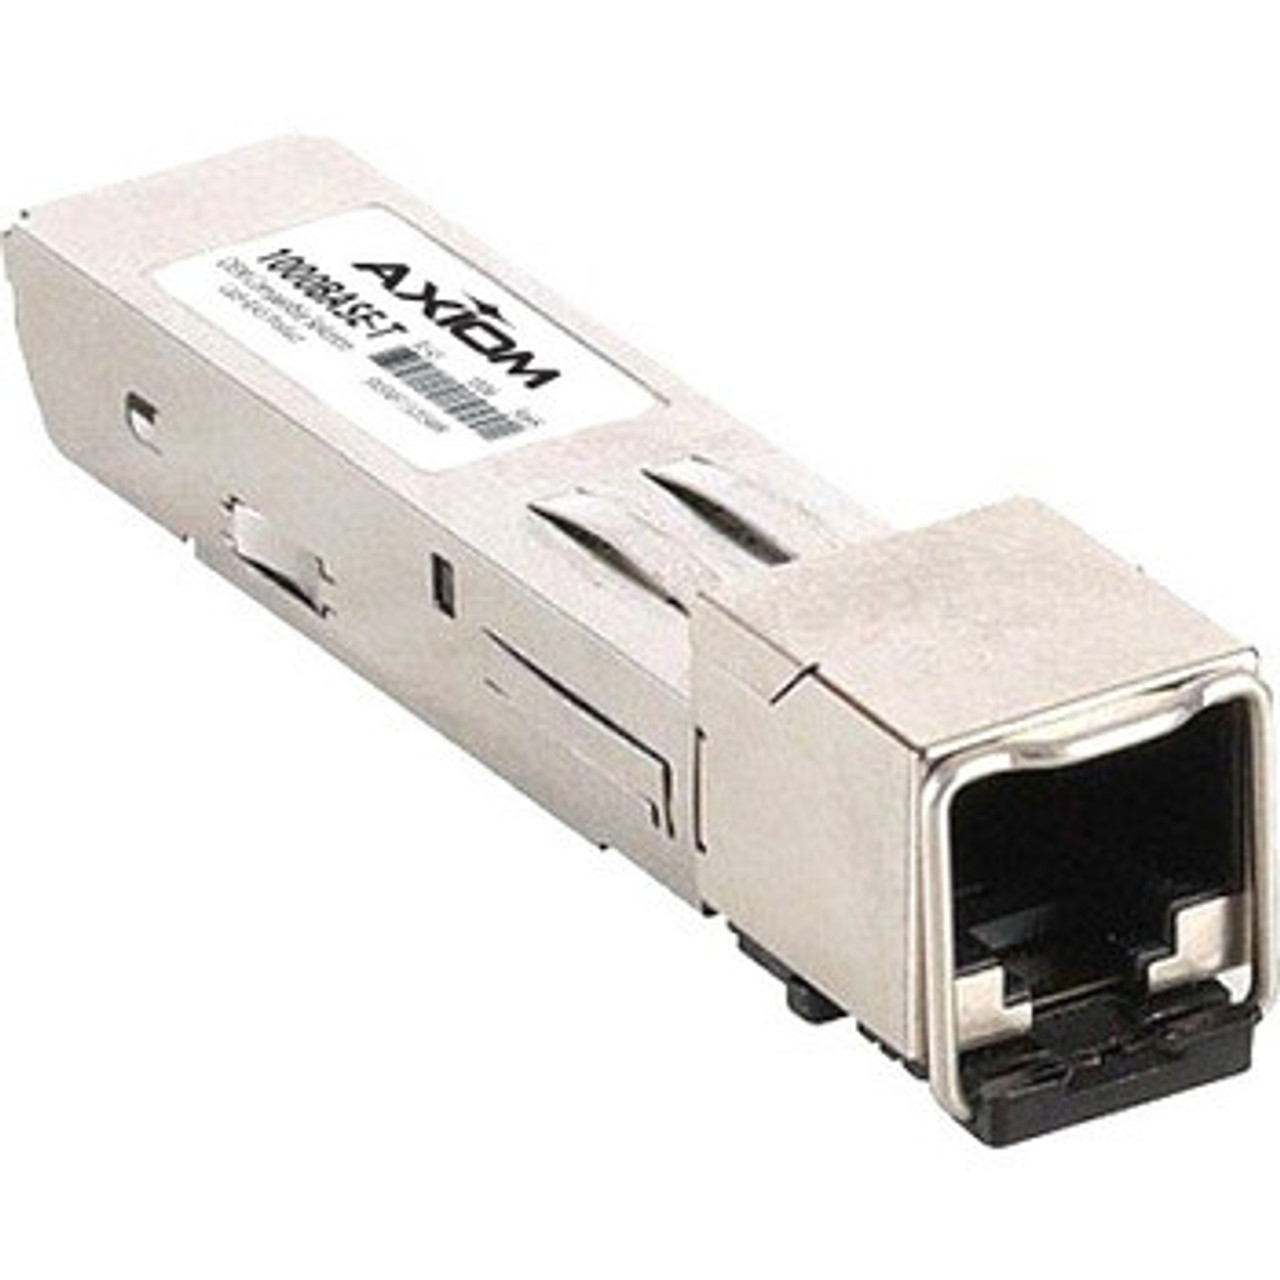 01-SSC-9791-AX | Axiom | 1Gbps 1000Base-T Copper 100m RJ-45 Connector SFP Transceiver Module for SonicWall Compatible